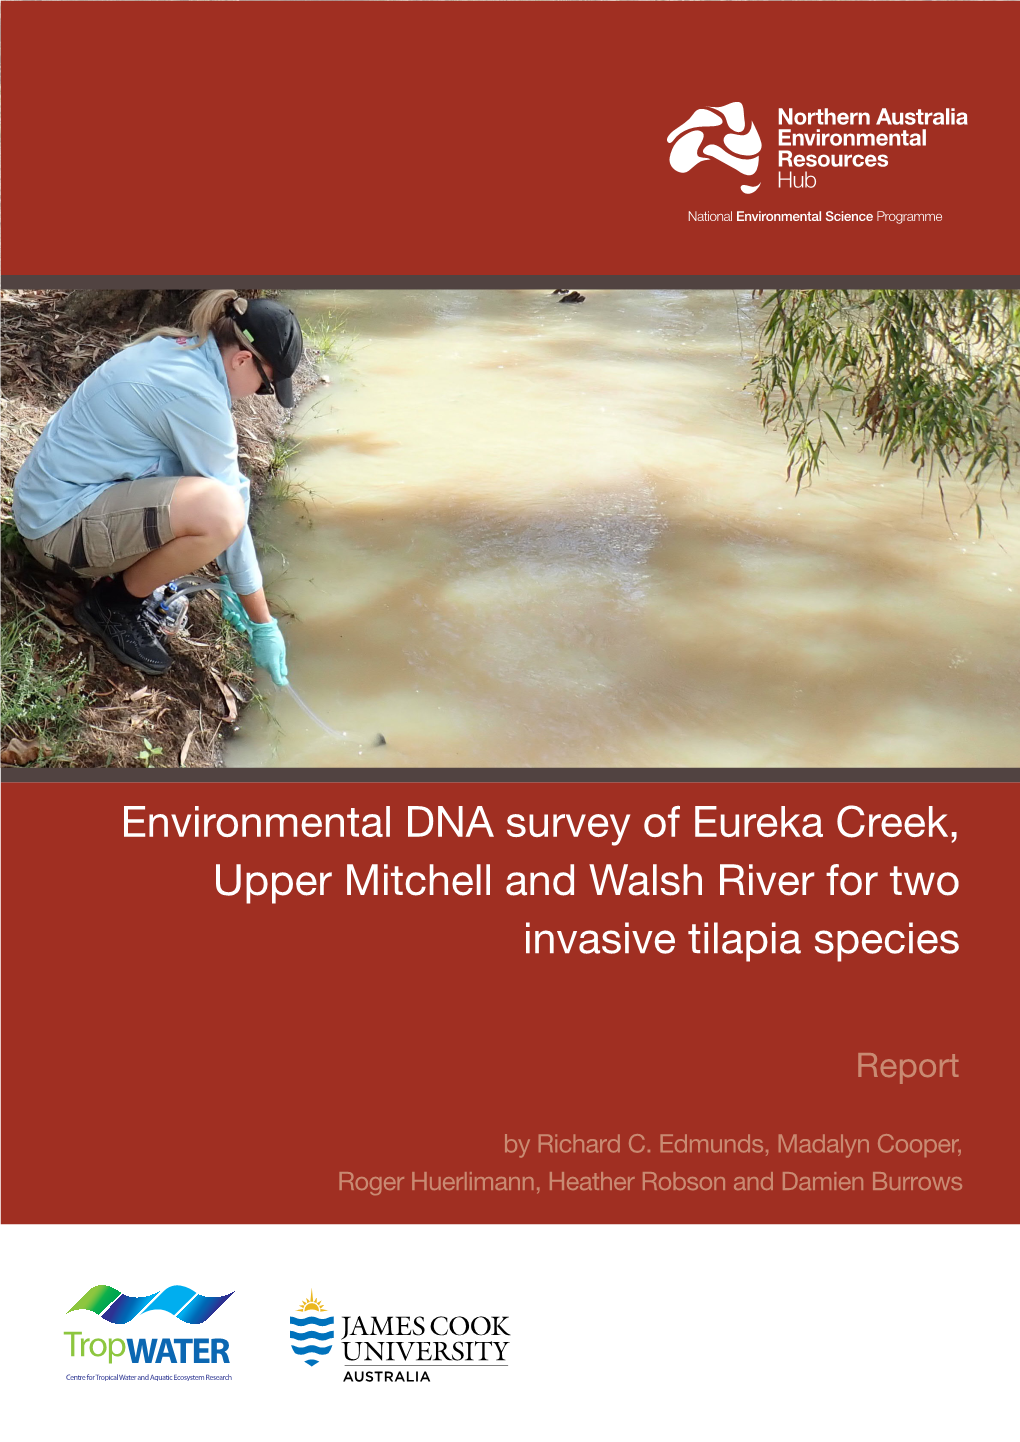 Edna Survey of Eureka Creek, Upper Mitchell and Walsh River for Two